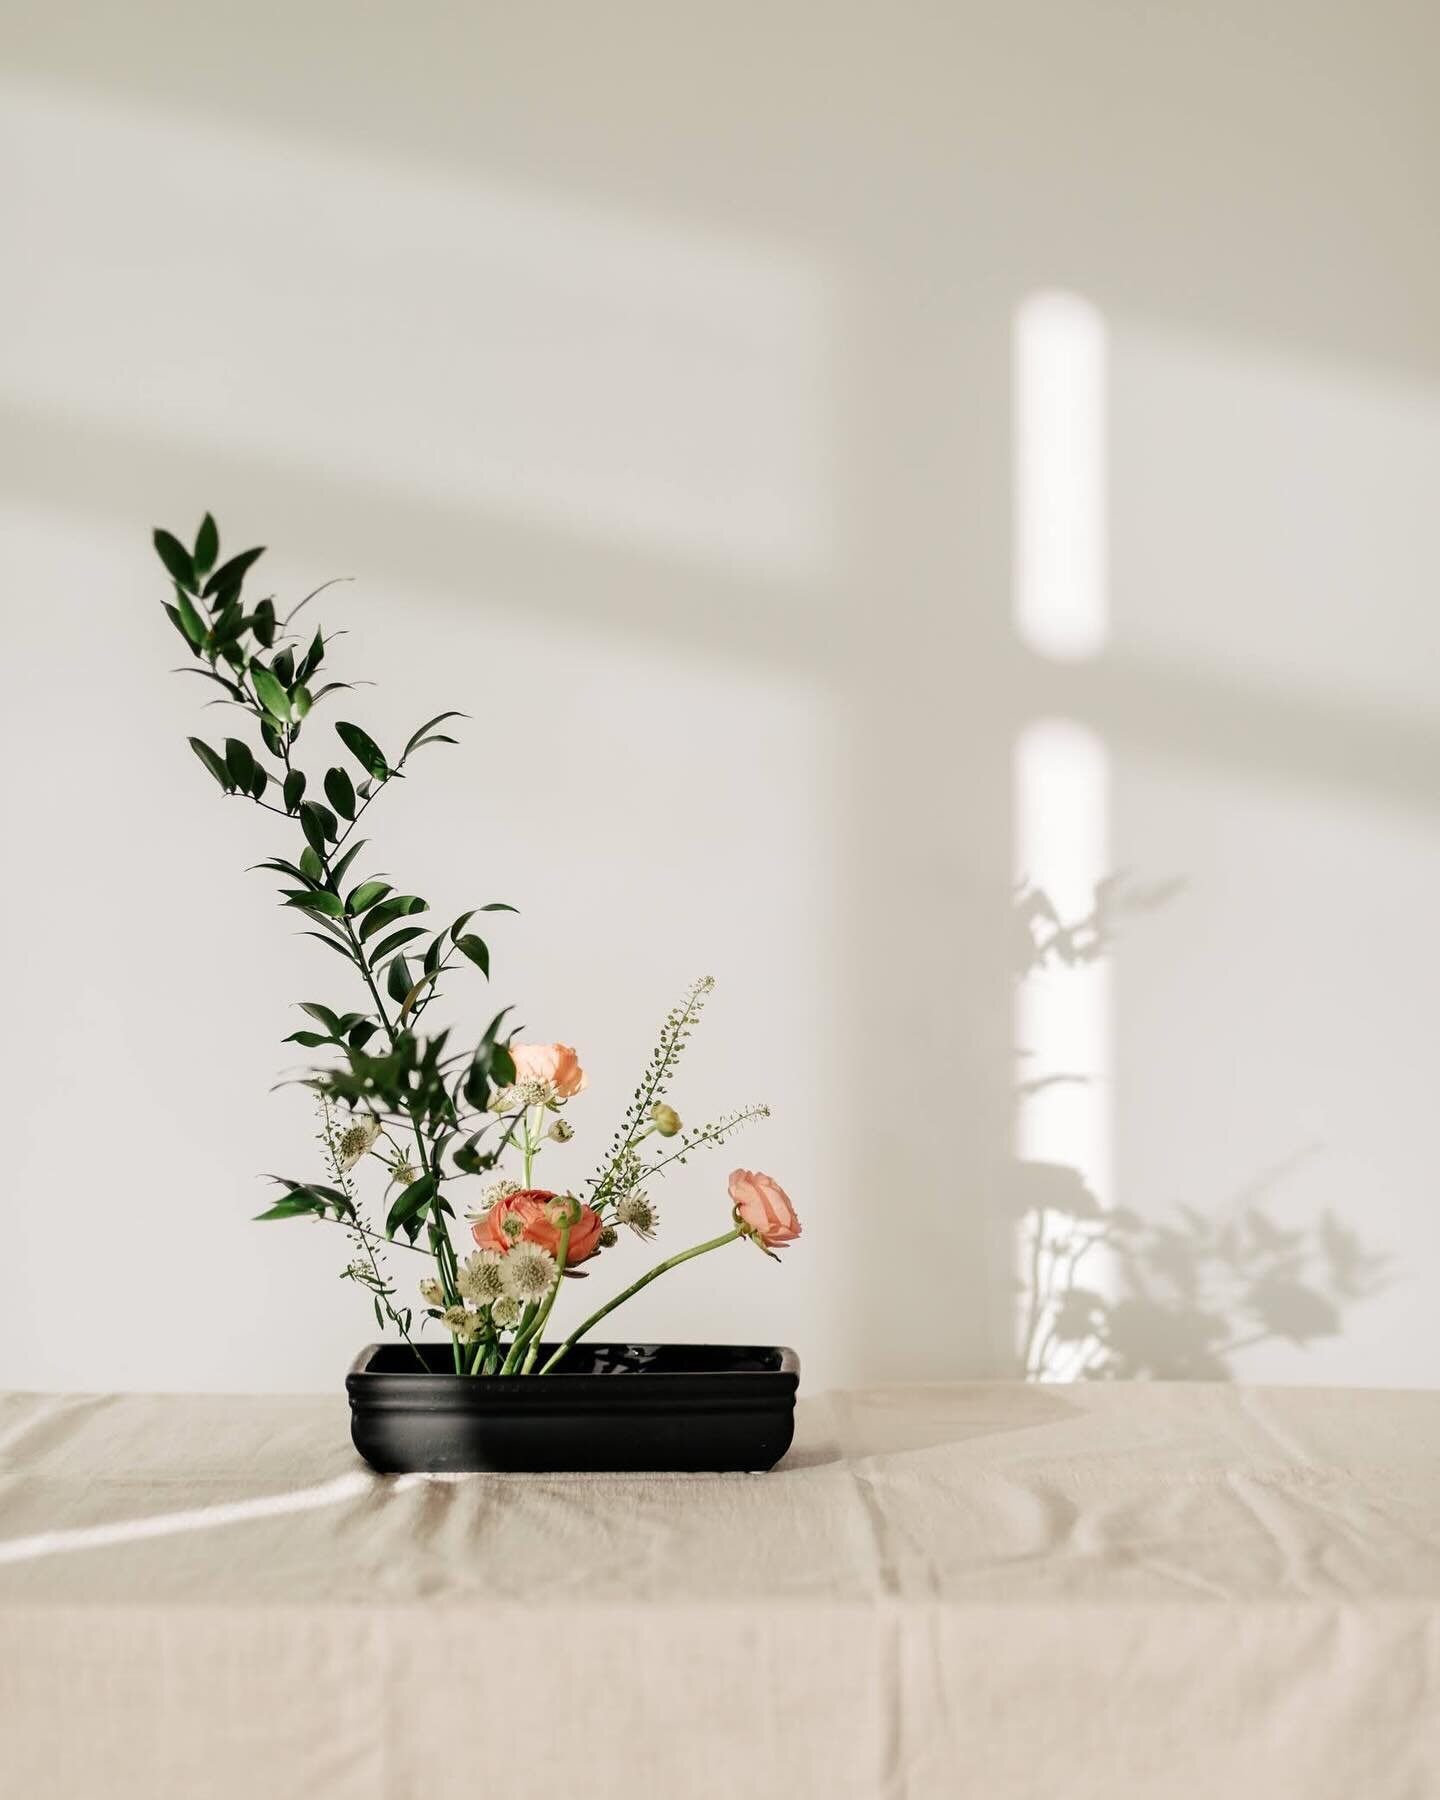 Have you ever tried ikebana? I made this at a baby sprinkle and it turned out so nicely. We had a workshop on this Japanese art of arranging flowers, taught by @ikebanaya. She showed us each step and explained the process before we tried it ourselves